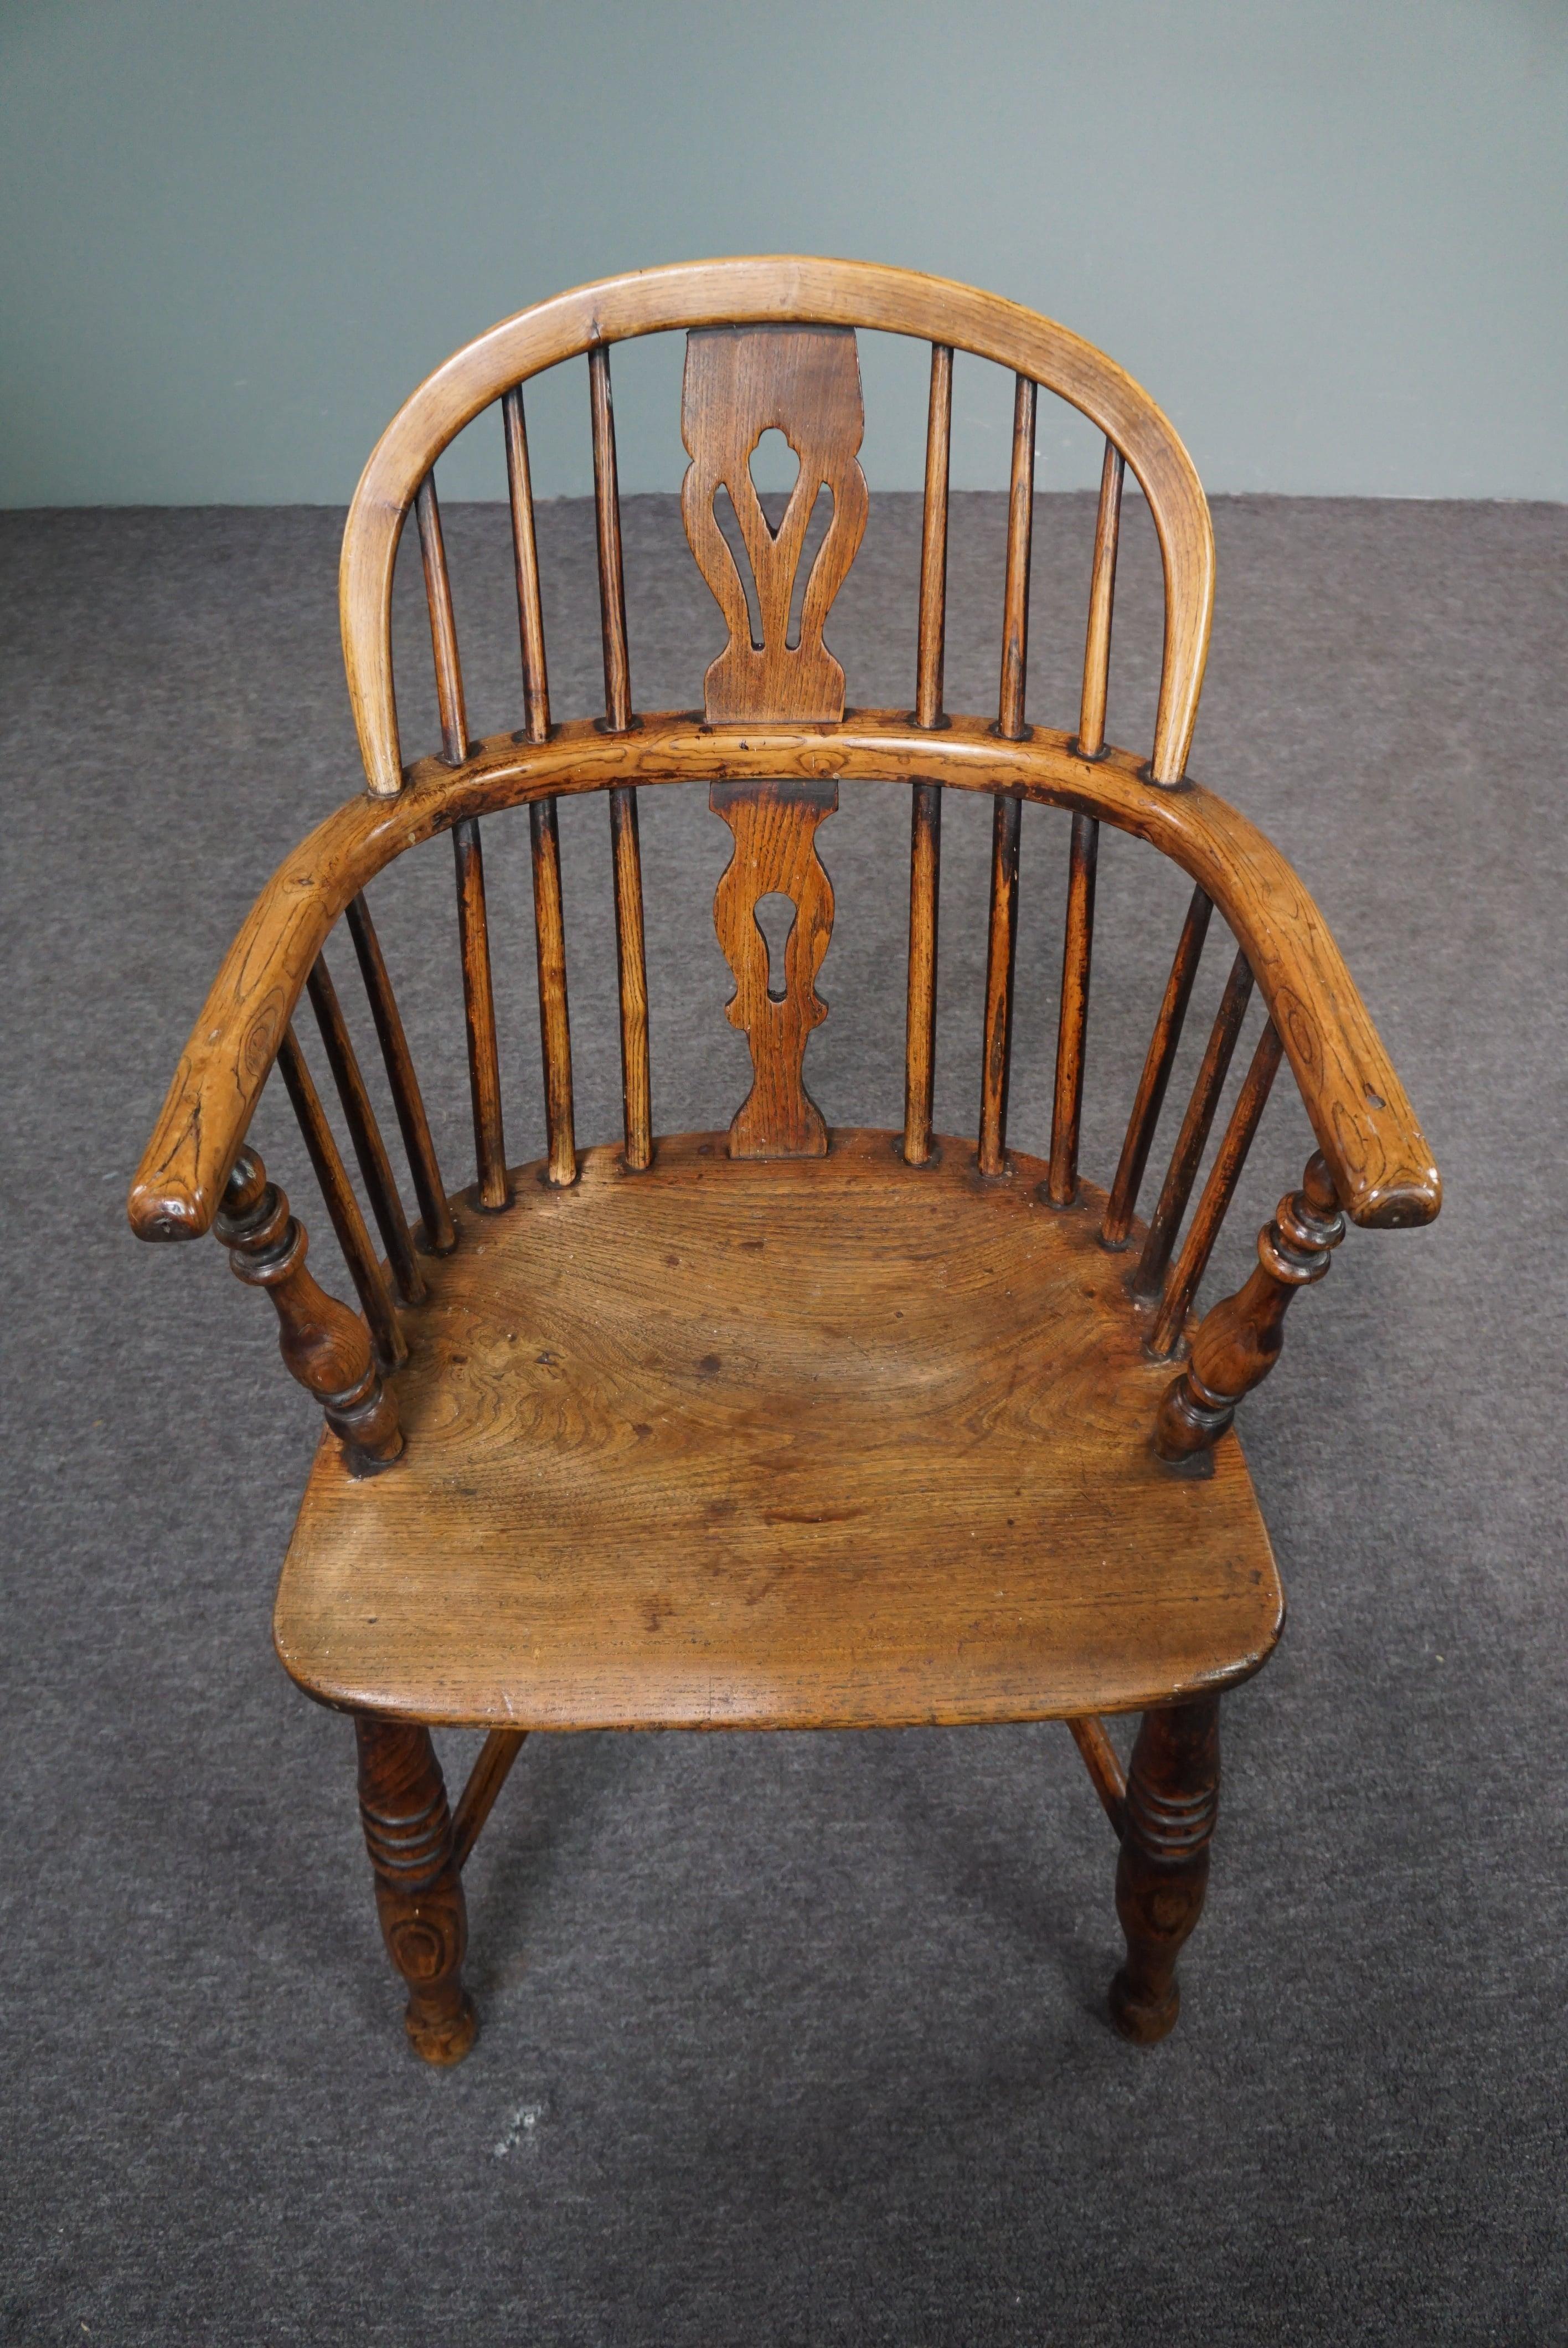 Wood Antique English Windsor chair/armchair, low back, 18th century For Sale